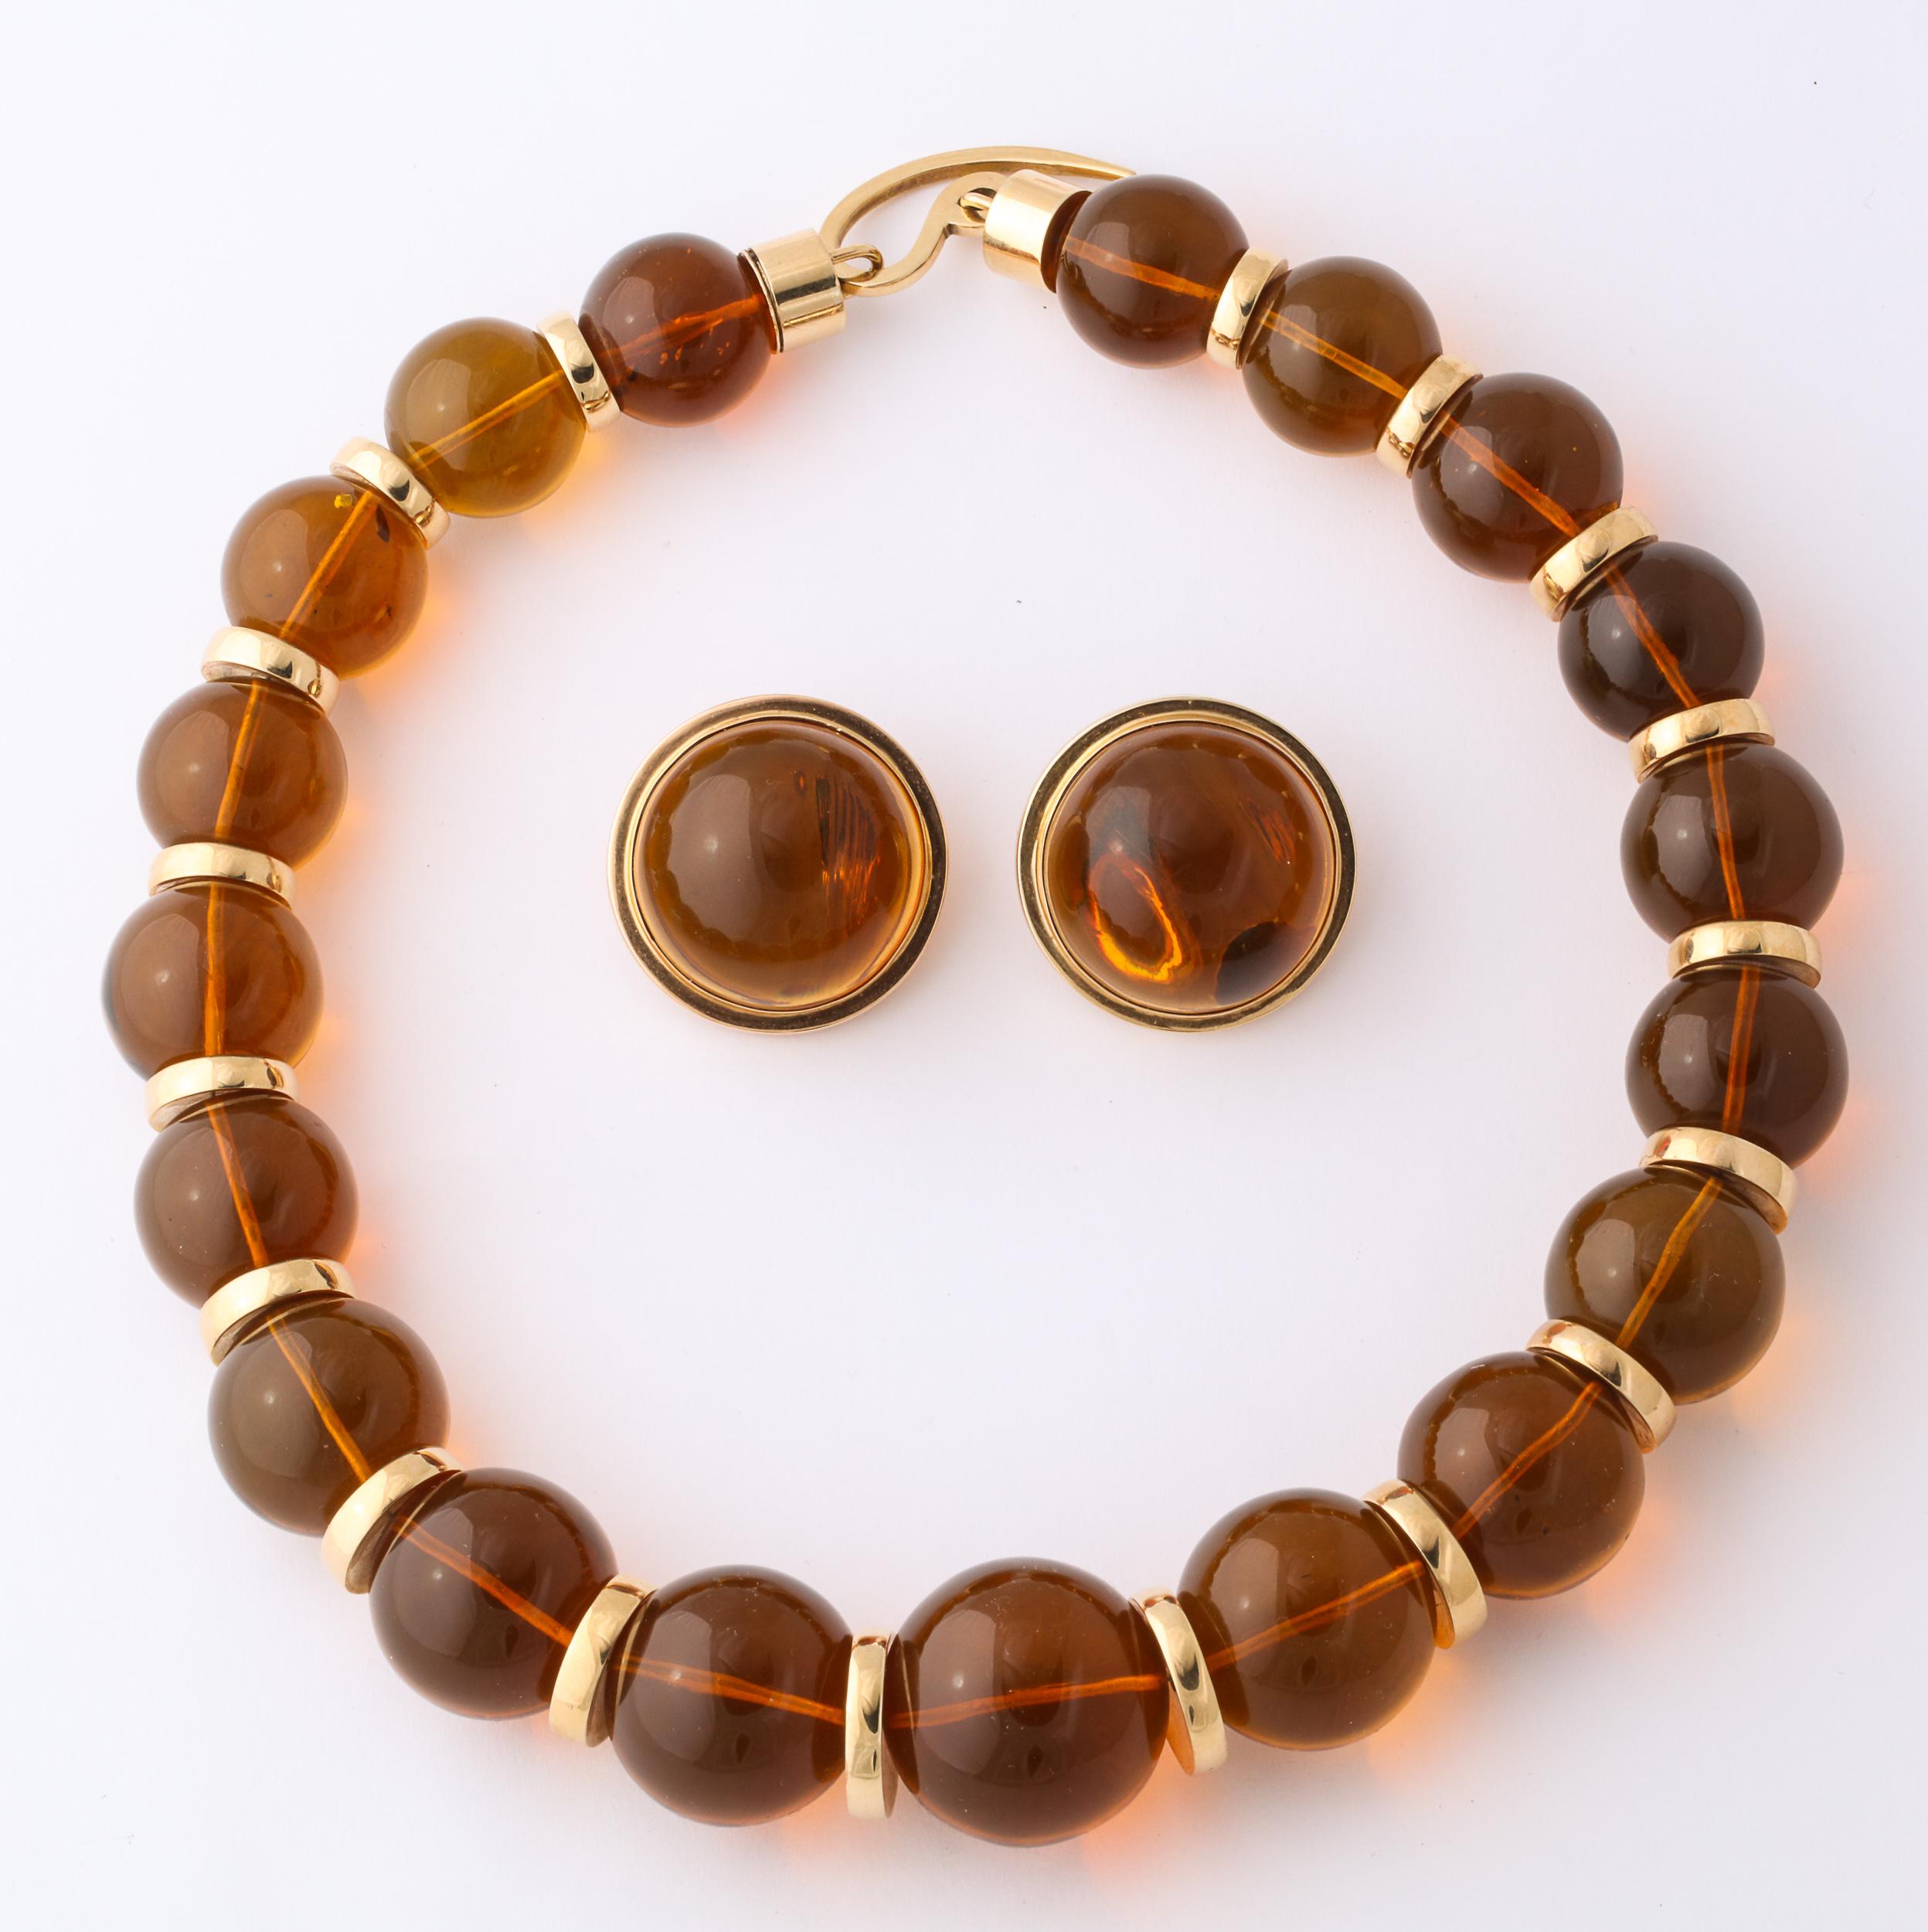 Reconstituted Polished Amber Beads Set in Bezel Setting For Sale 2